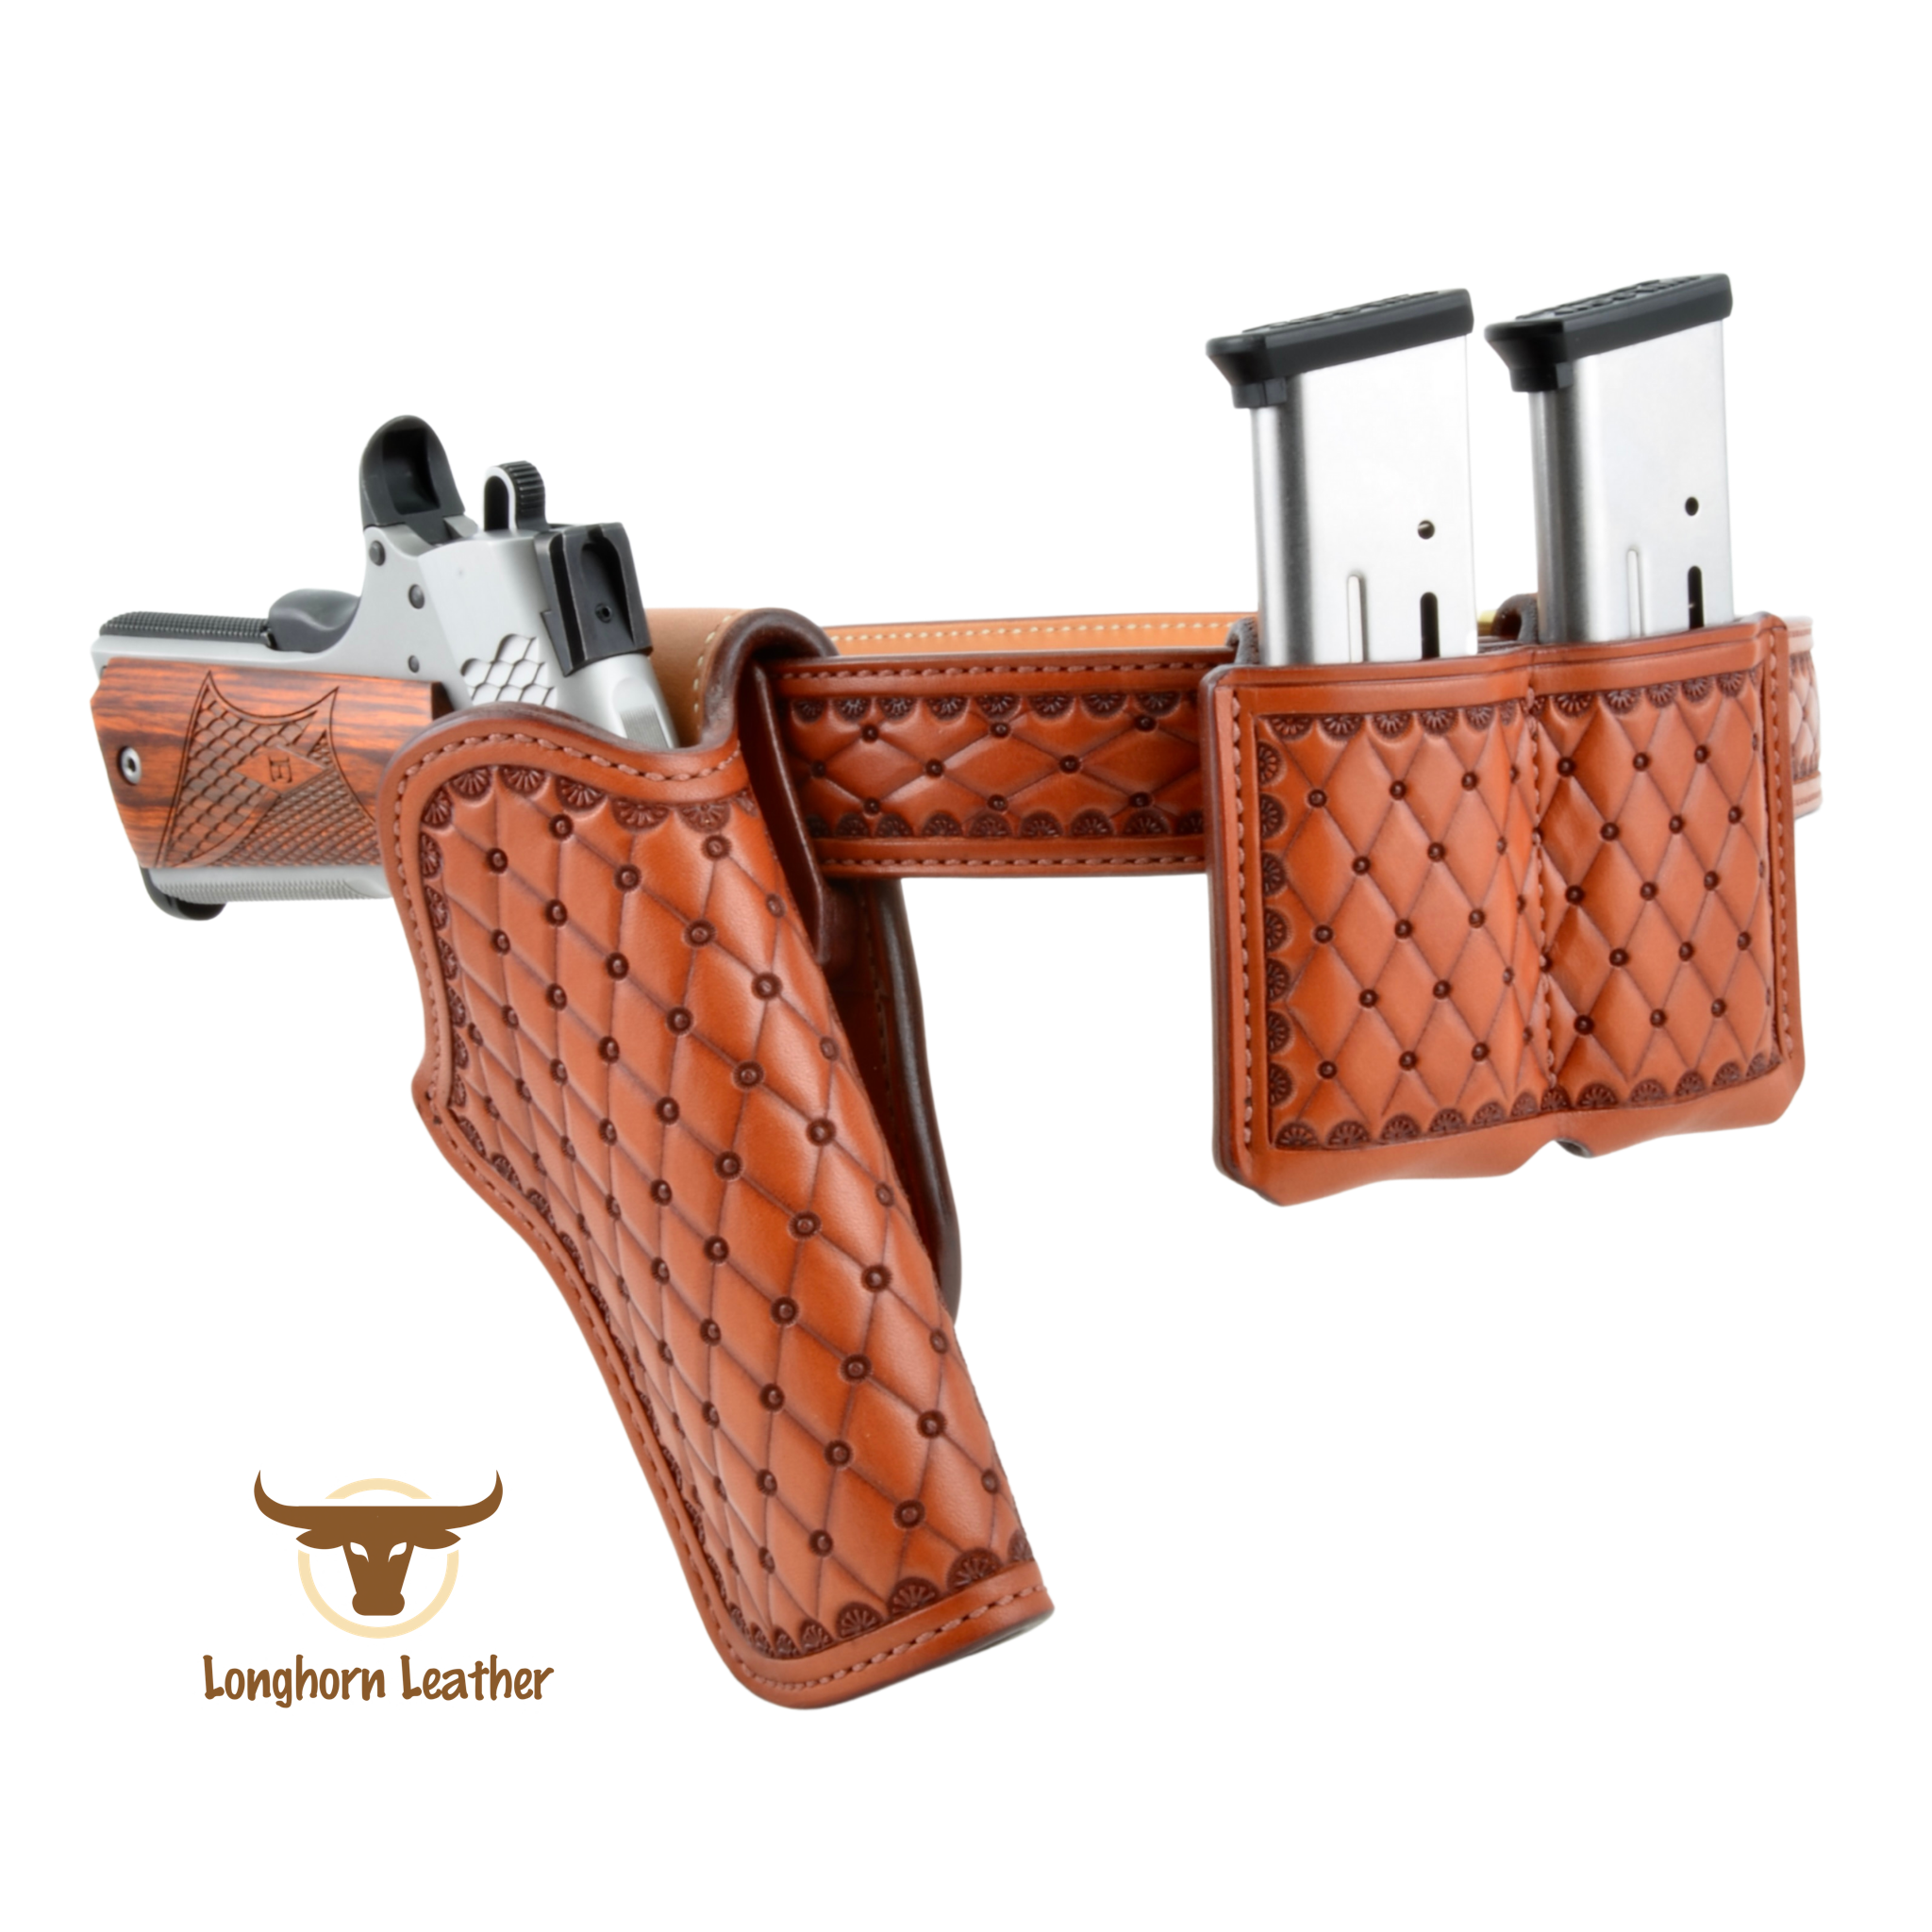 Custom Leather 1911 holster, gun belt and magazine carrier featuring the “San Carlos” design.  Individually handcrafted at Longhorn Leather AZ